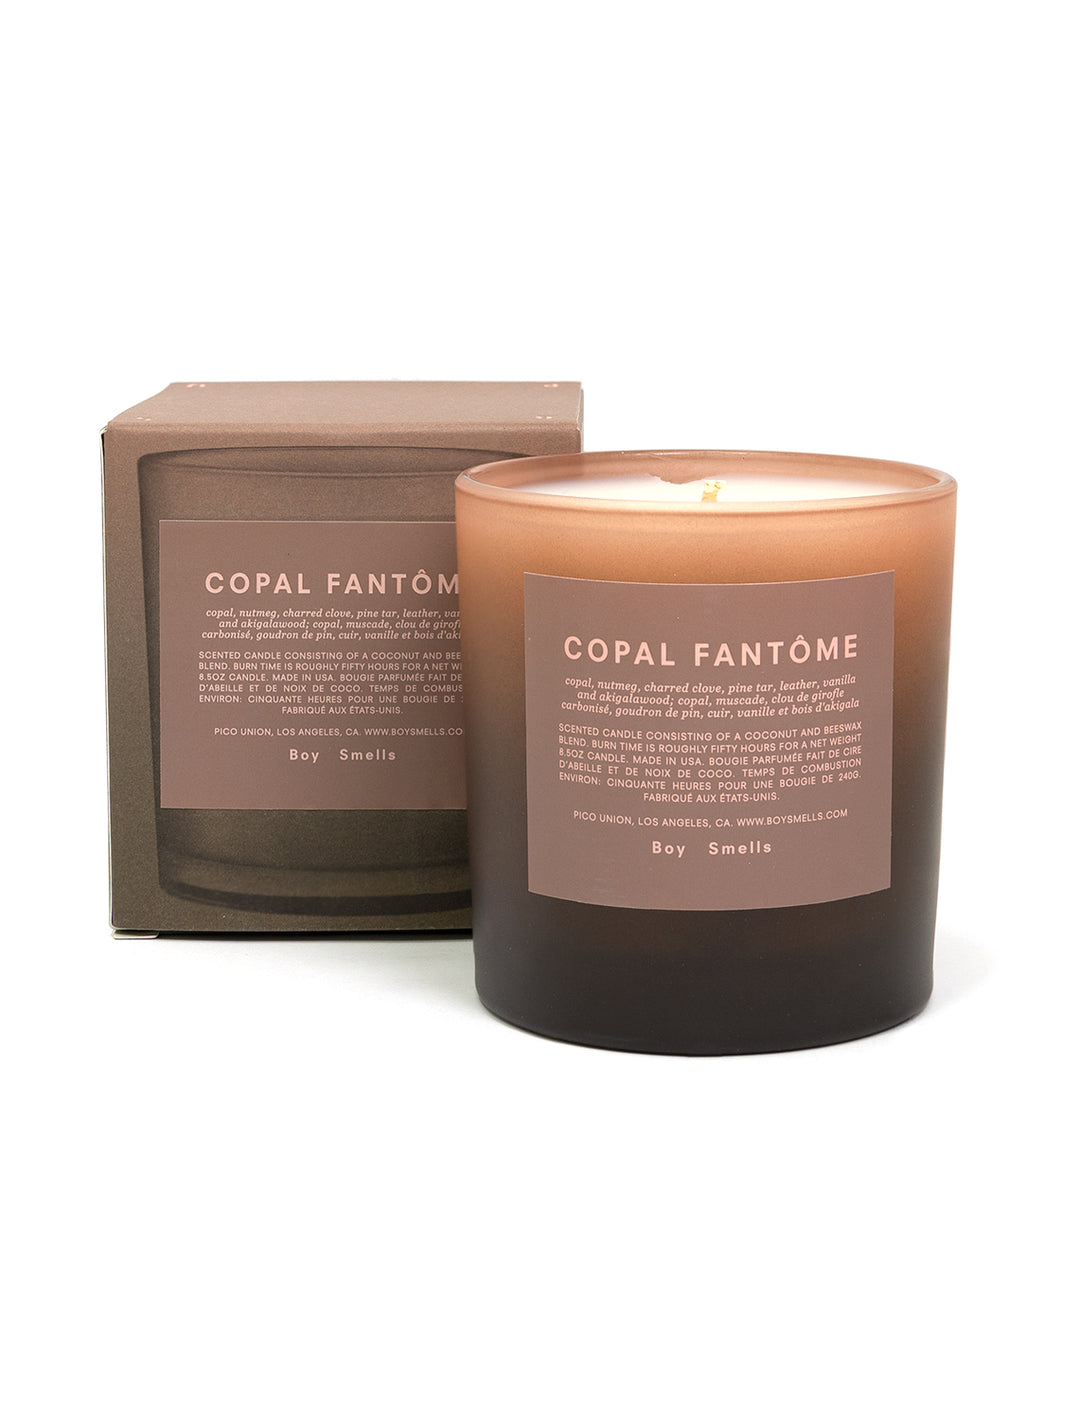 Boy Smells' copal fantome candle packaging.